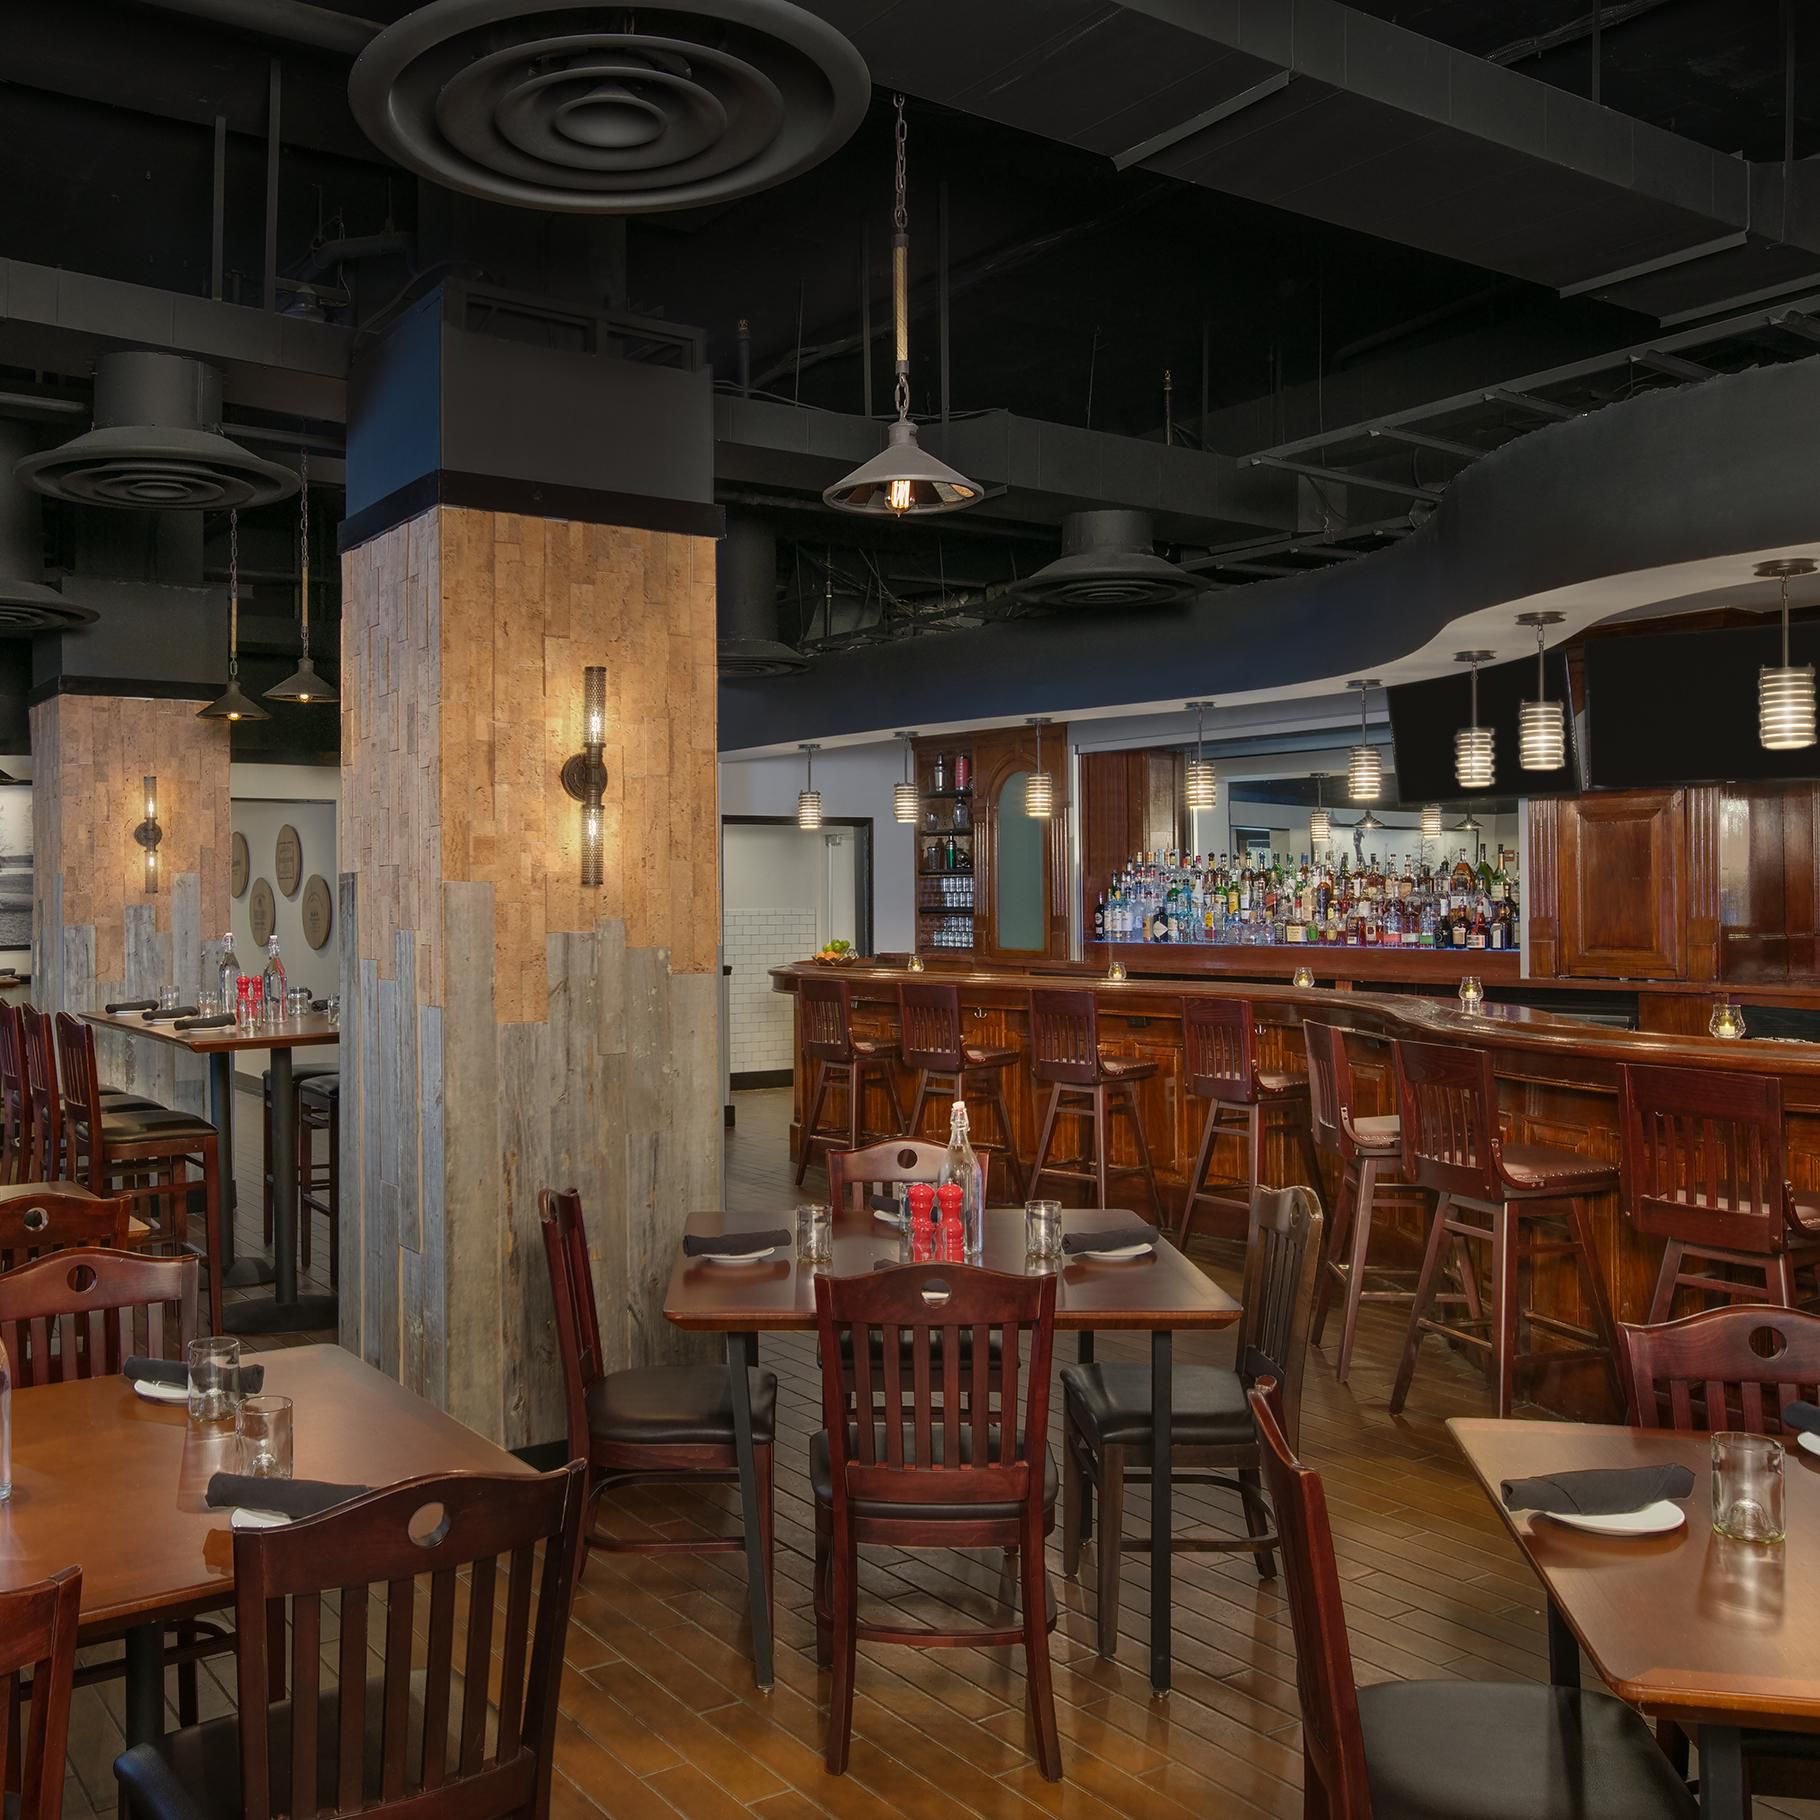 Enjoy American fare and an extensive tap list at our tavern.